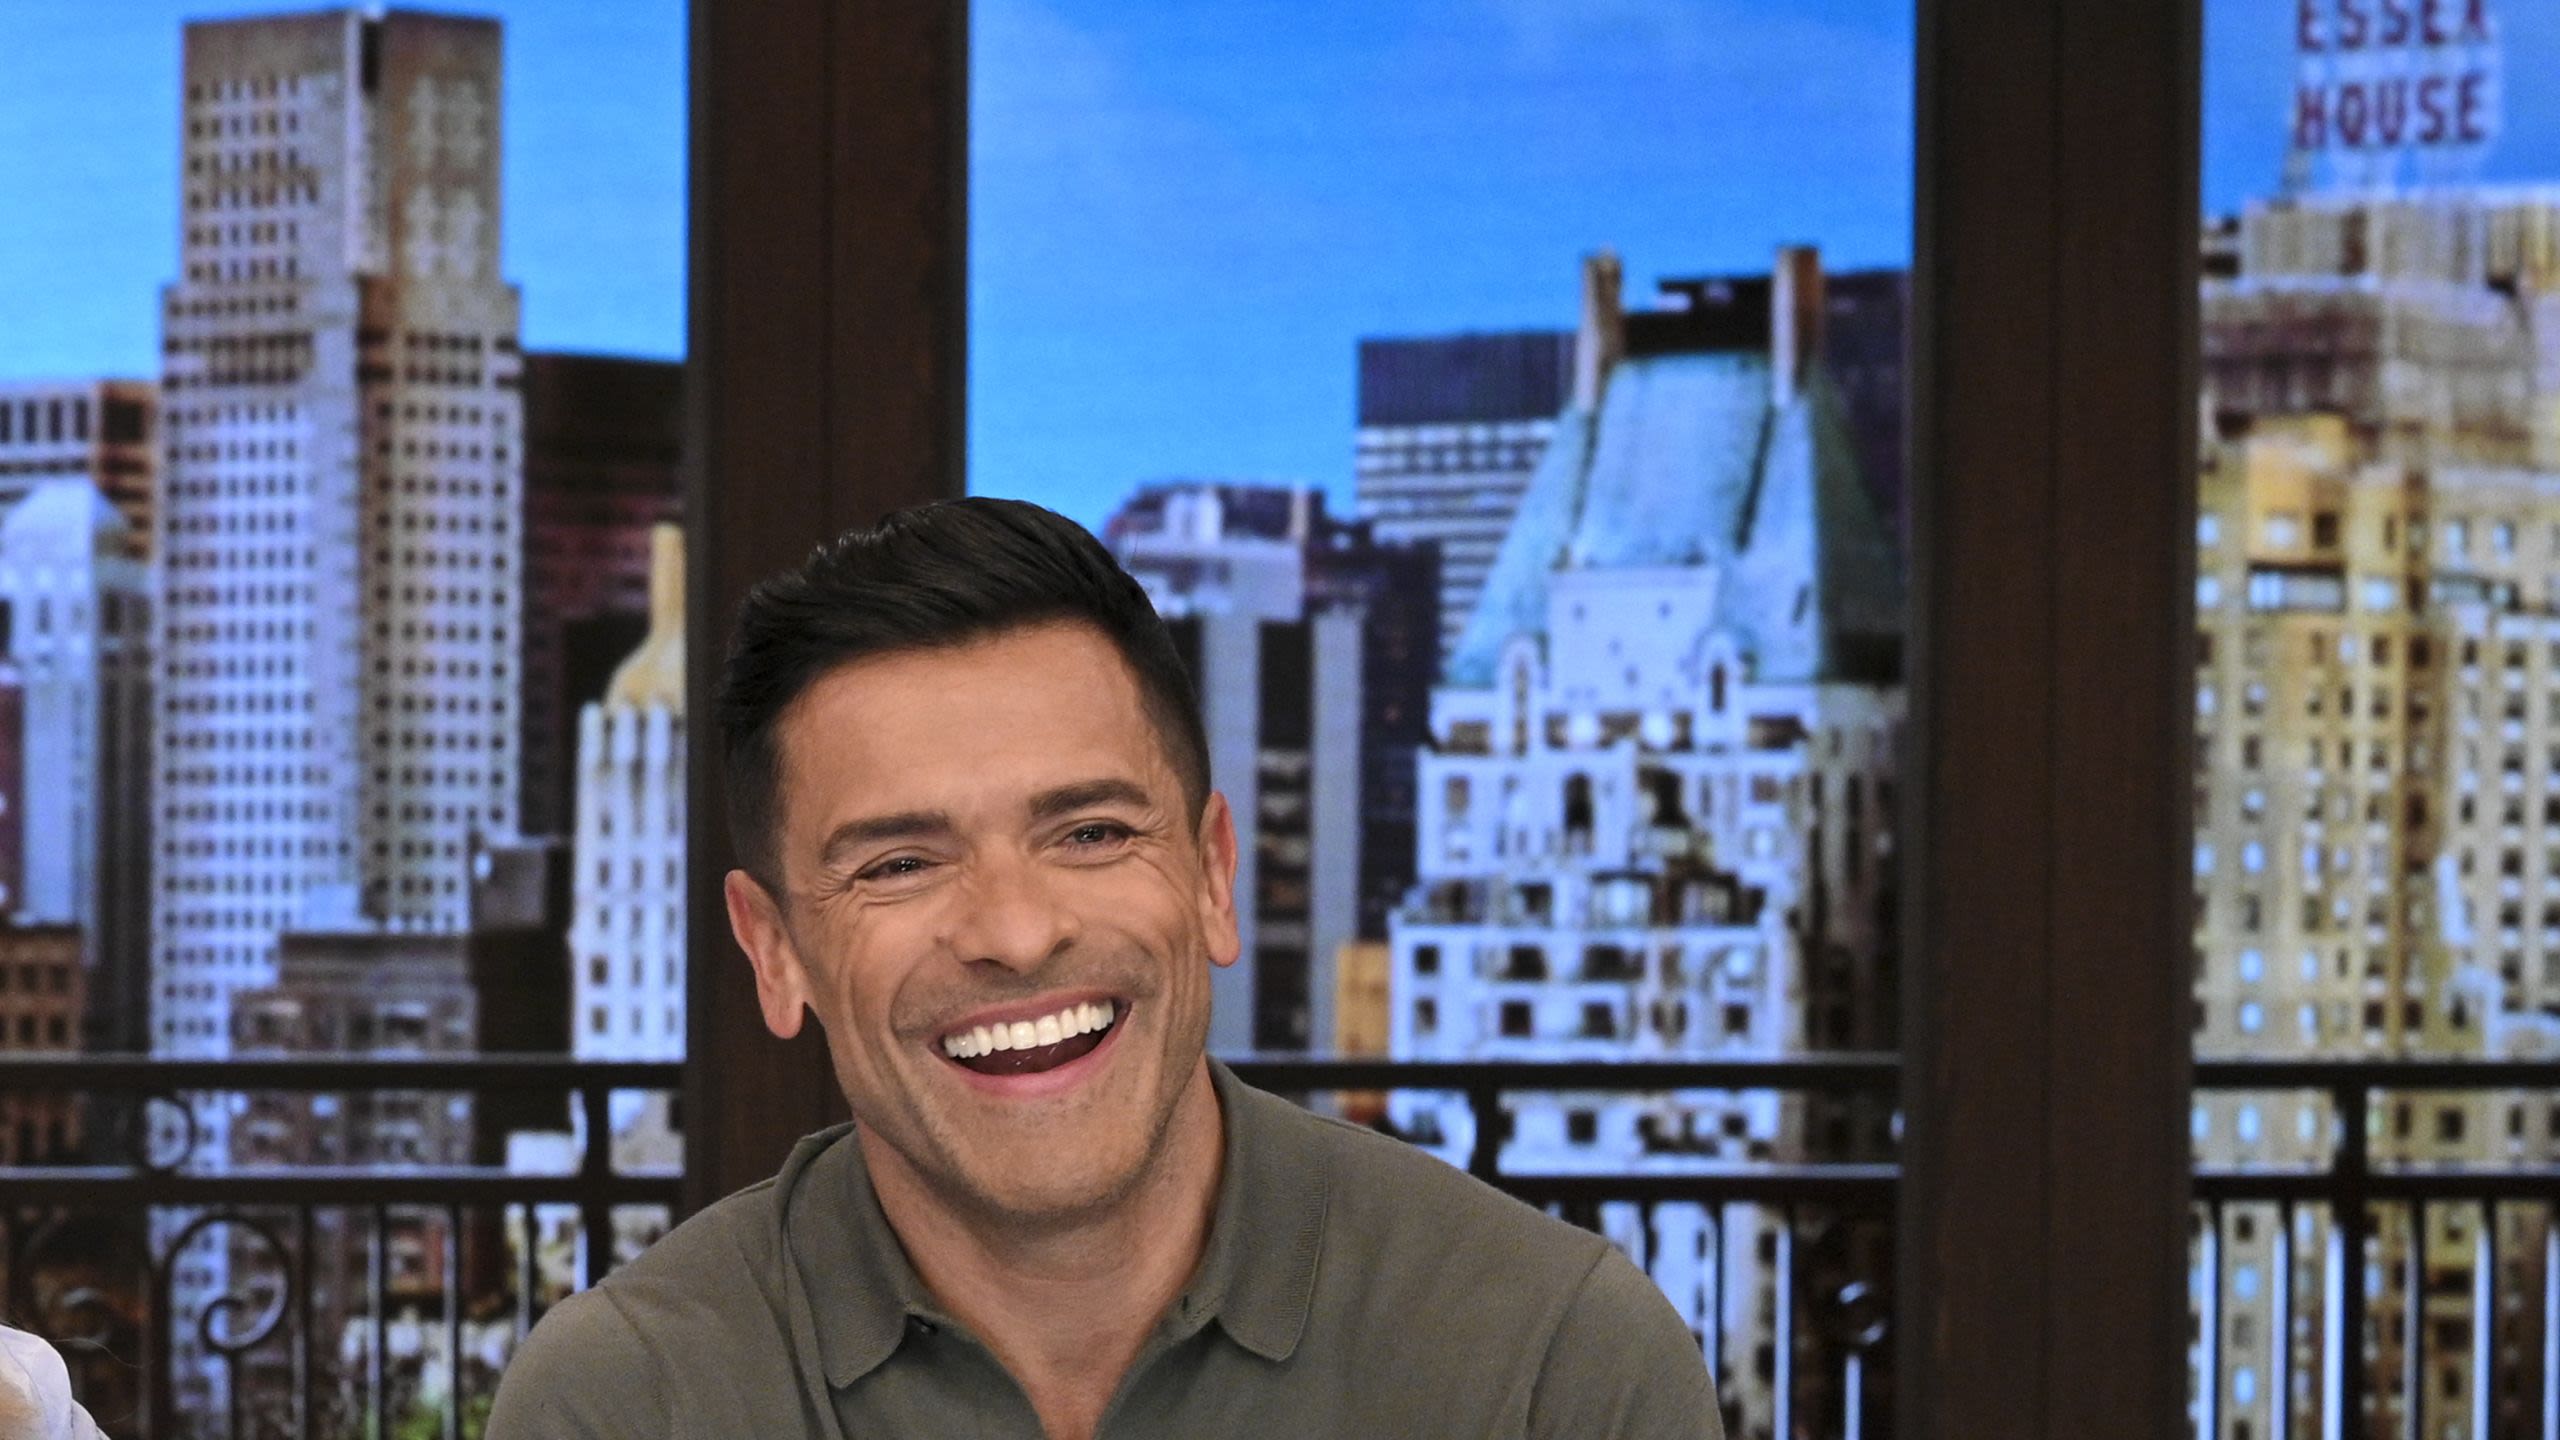 See Mark Consuelos' New Look That Had "Live" Fans Stunned